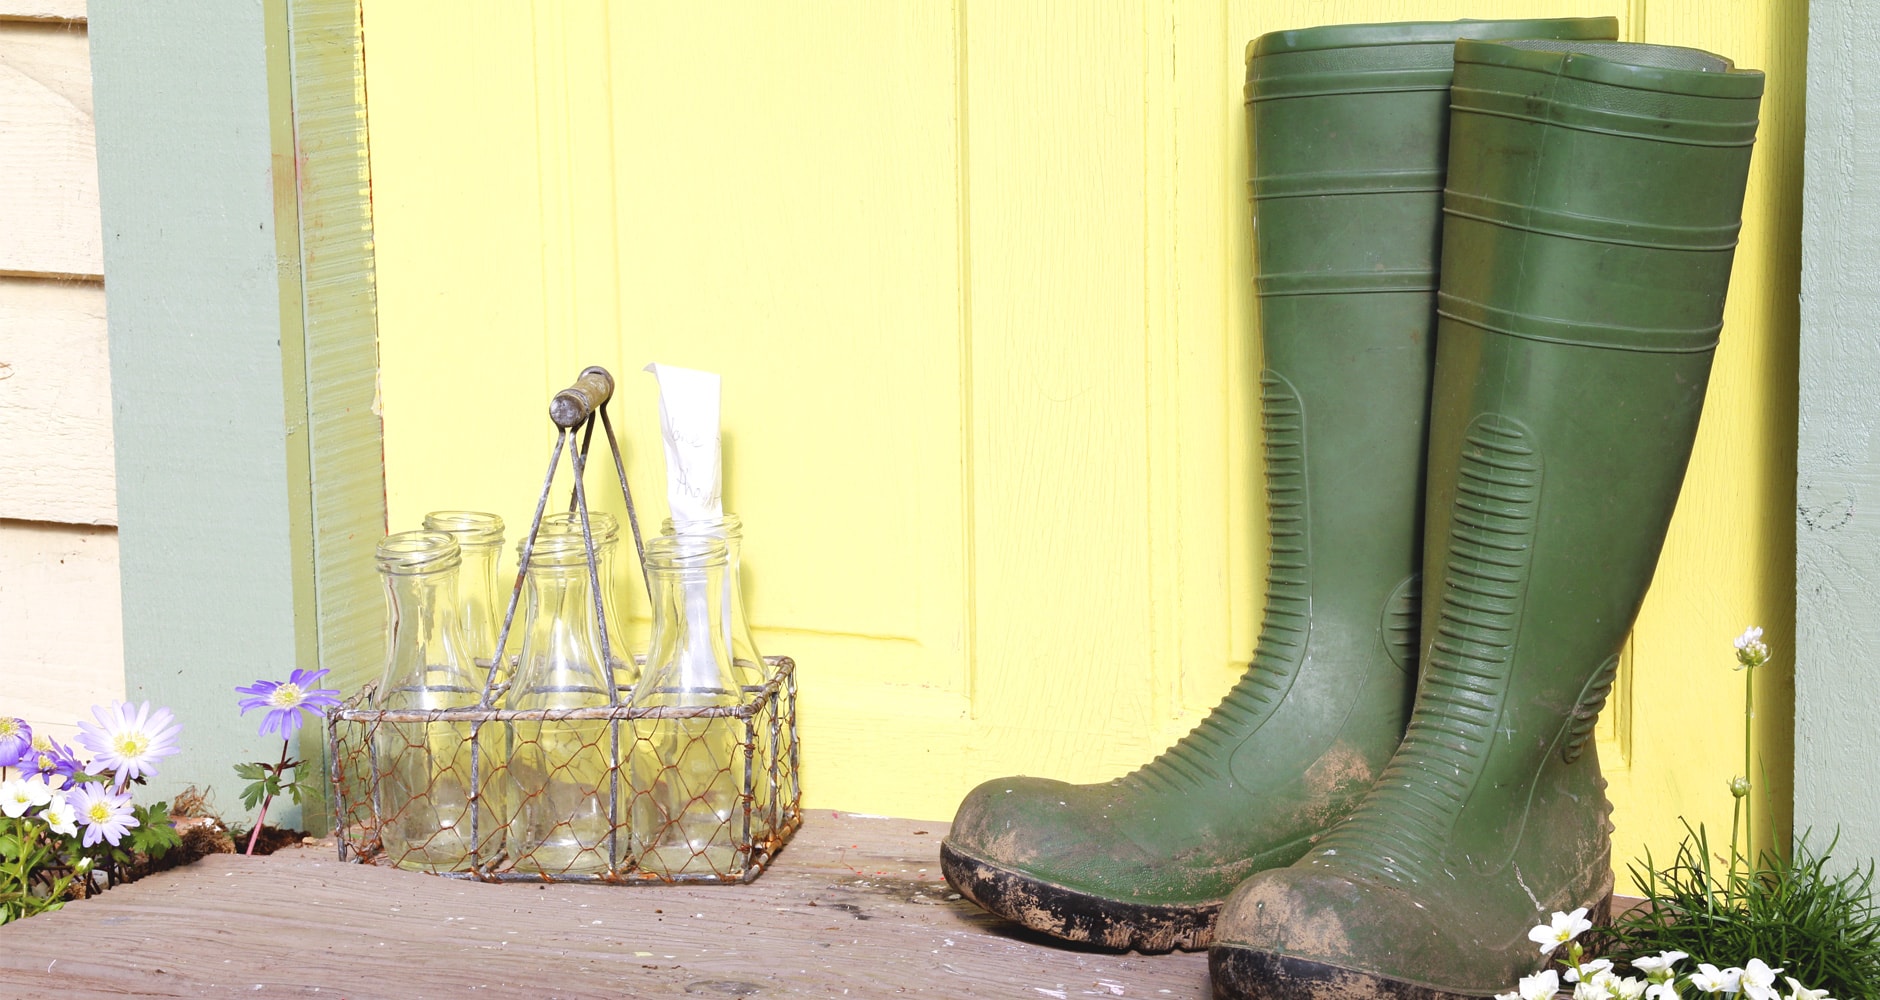 How Well Do You Know Your Wellies? Rain Boots Trivia - Farmers